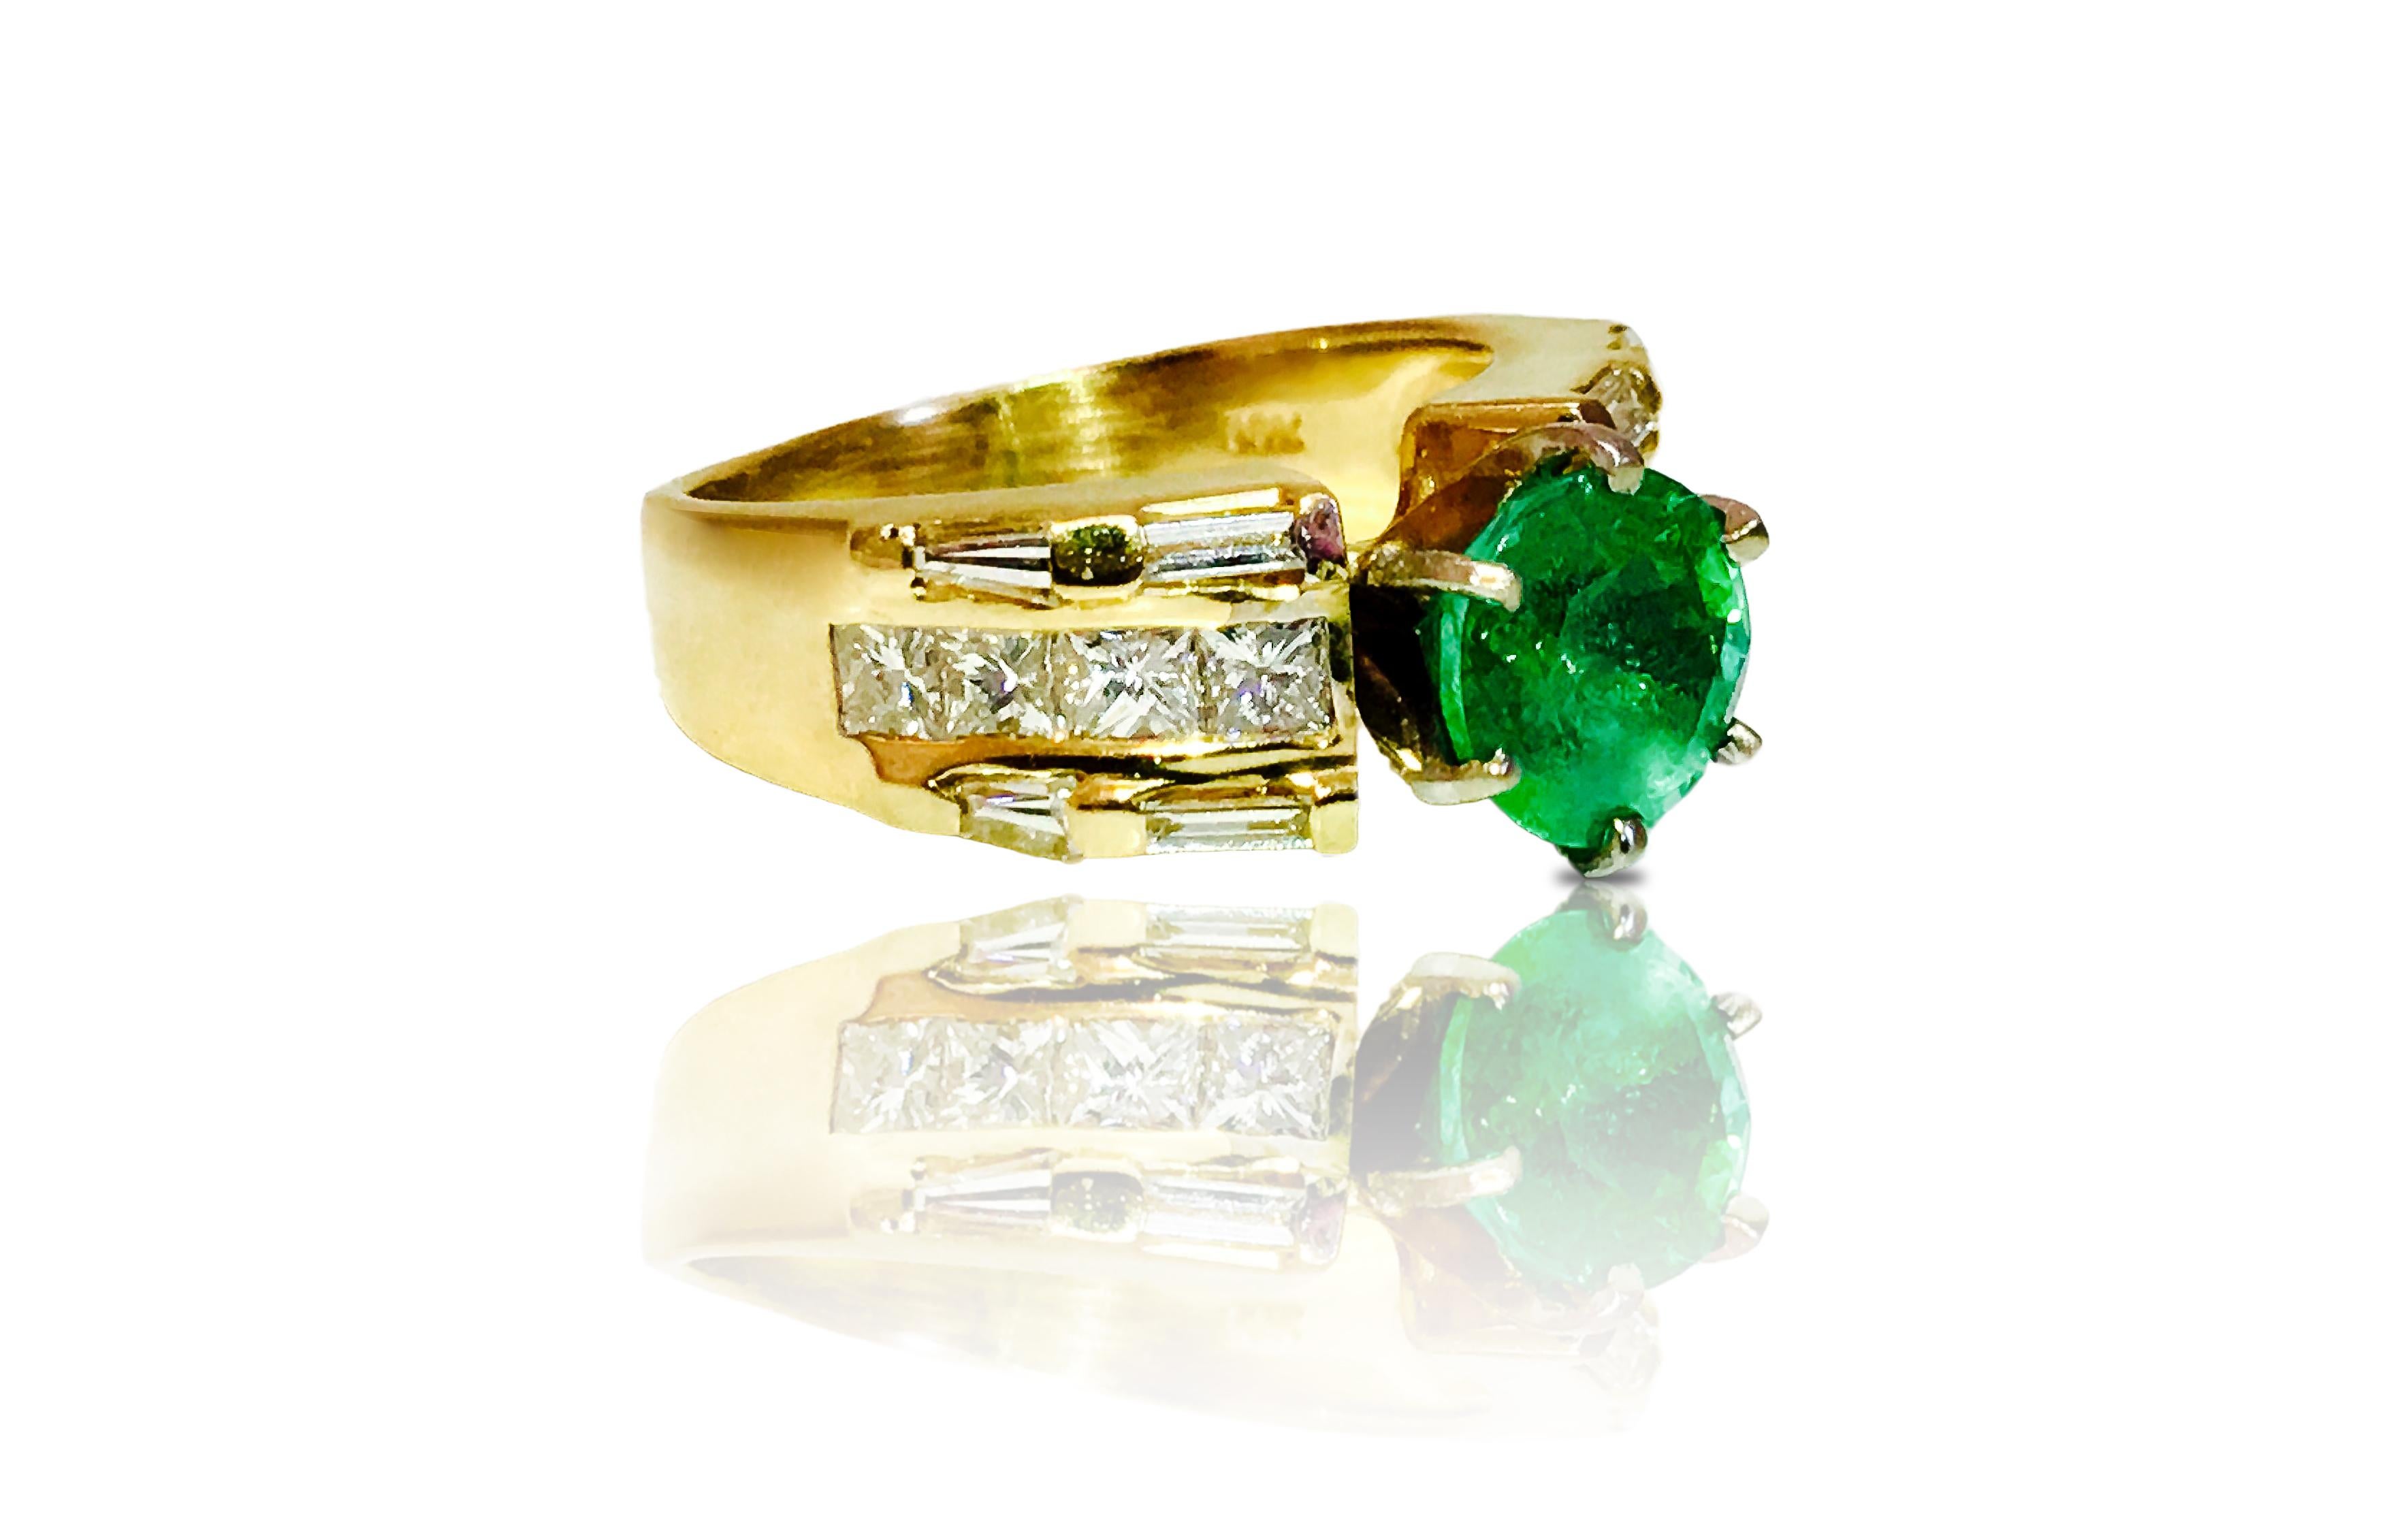 Metal: 14K Yellow gold. 
3.10 carat emerald, round cut. 100% natural earth mined. 
1.75 carat diamonds. VS clarity and G color. Baguette and princess cut diamonds. 

Total Carat weight of all precious stones: 4.85 carats. 
All precious stones are